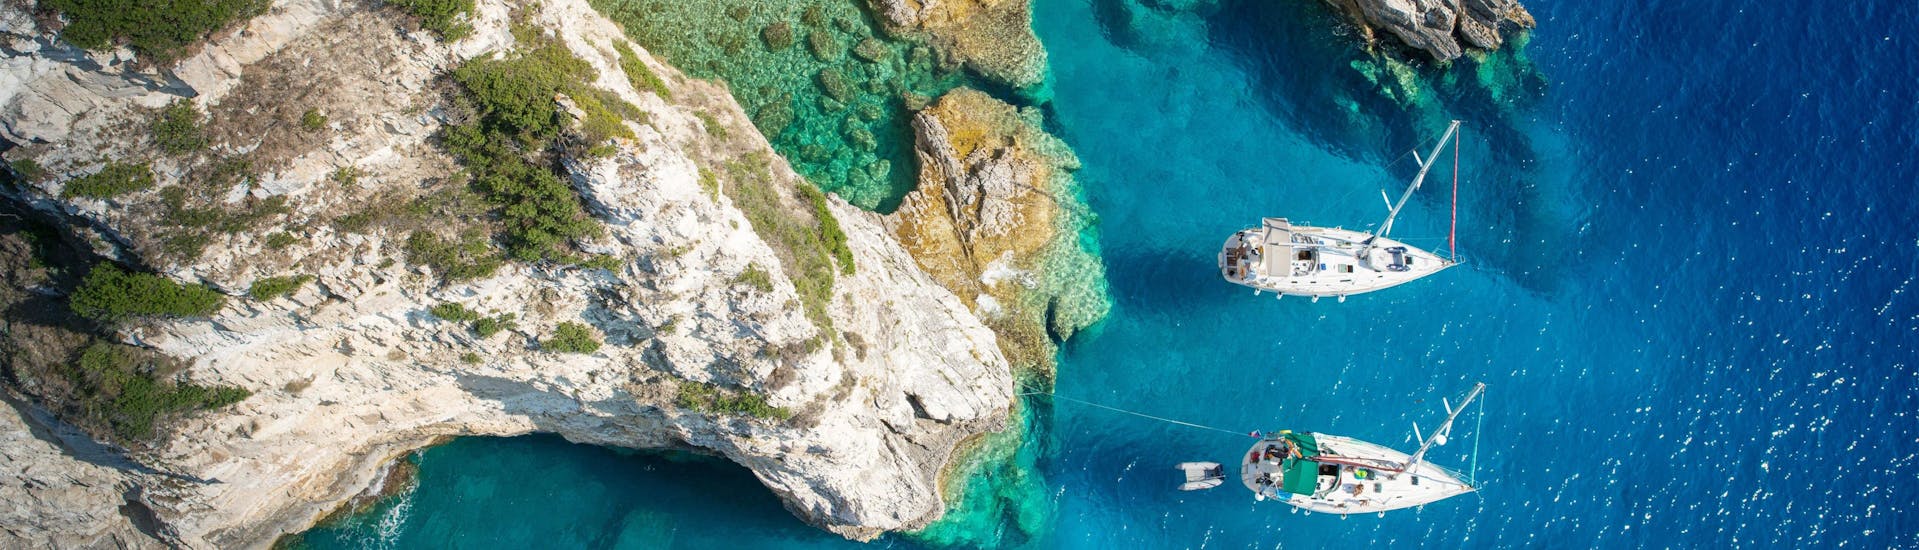 Aerial view of a cove on the island of Paxos where boats are moored, a popular destination in Greece for boat trips.